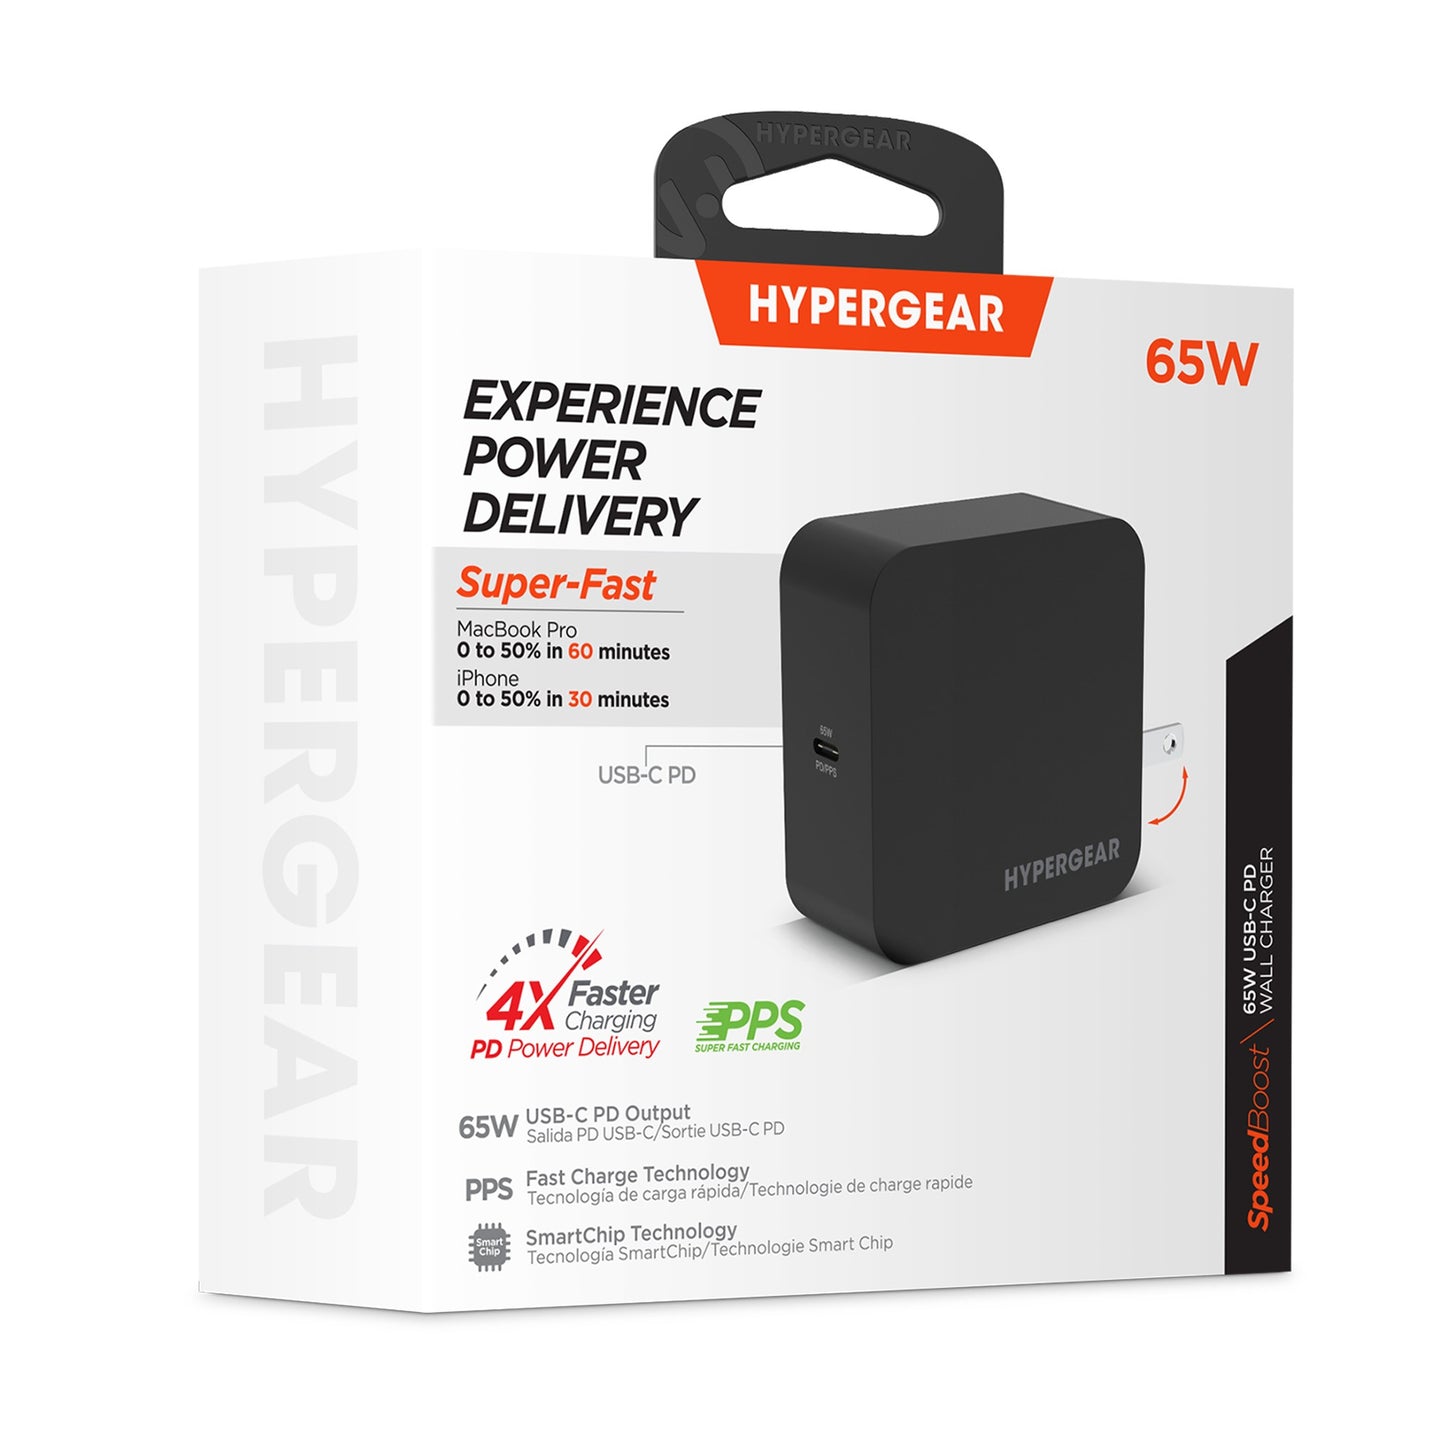 HyperGear SpeedBoost 65W USB-C PD Laptop Wall Charger with PPS - Black - 15-11150